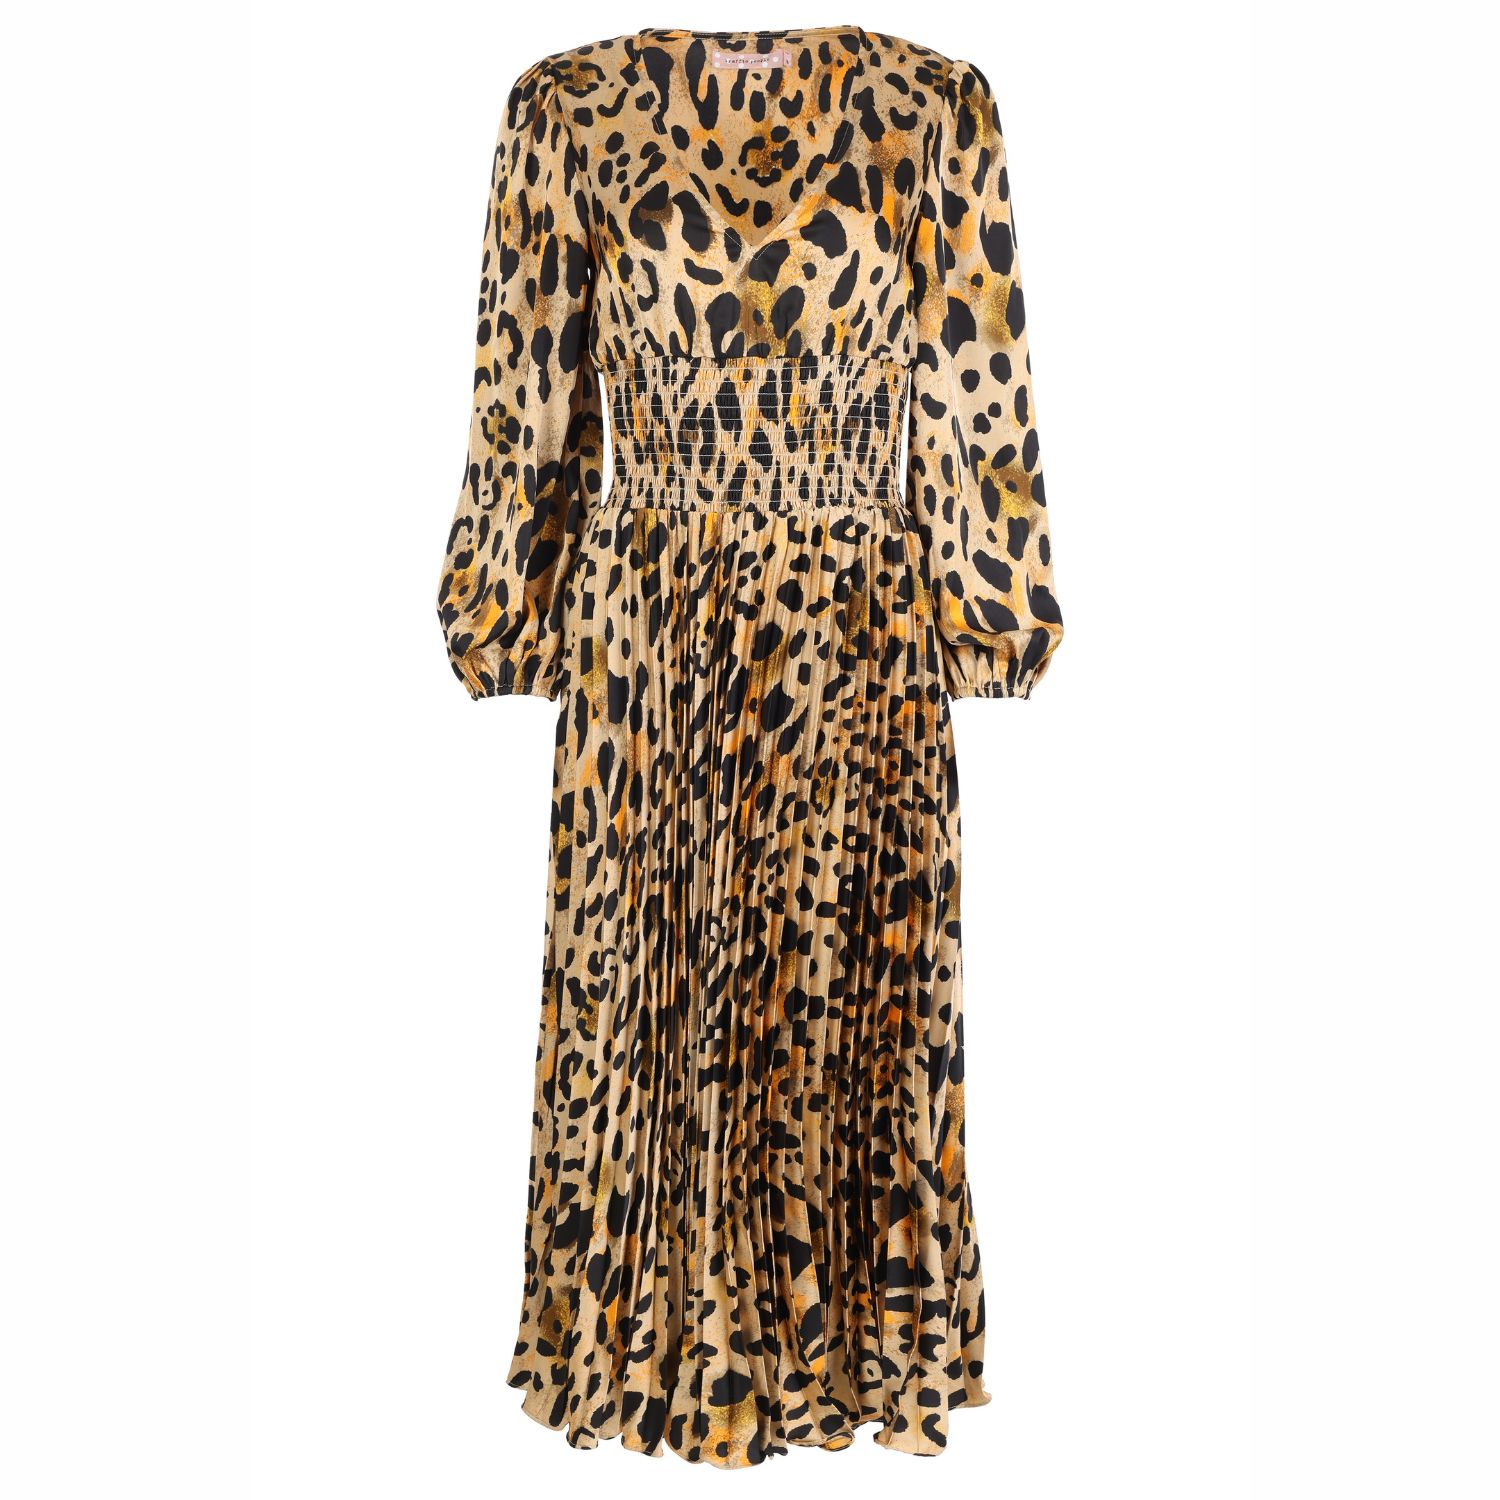 Traffic People Women's Brown When They See Me Leopard Print Aurora Dress